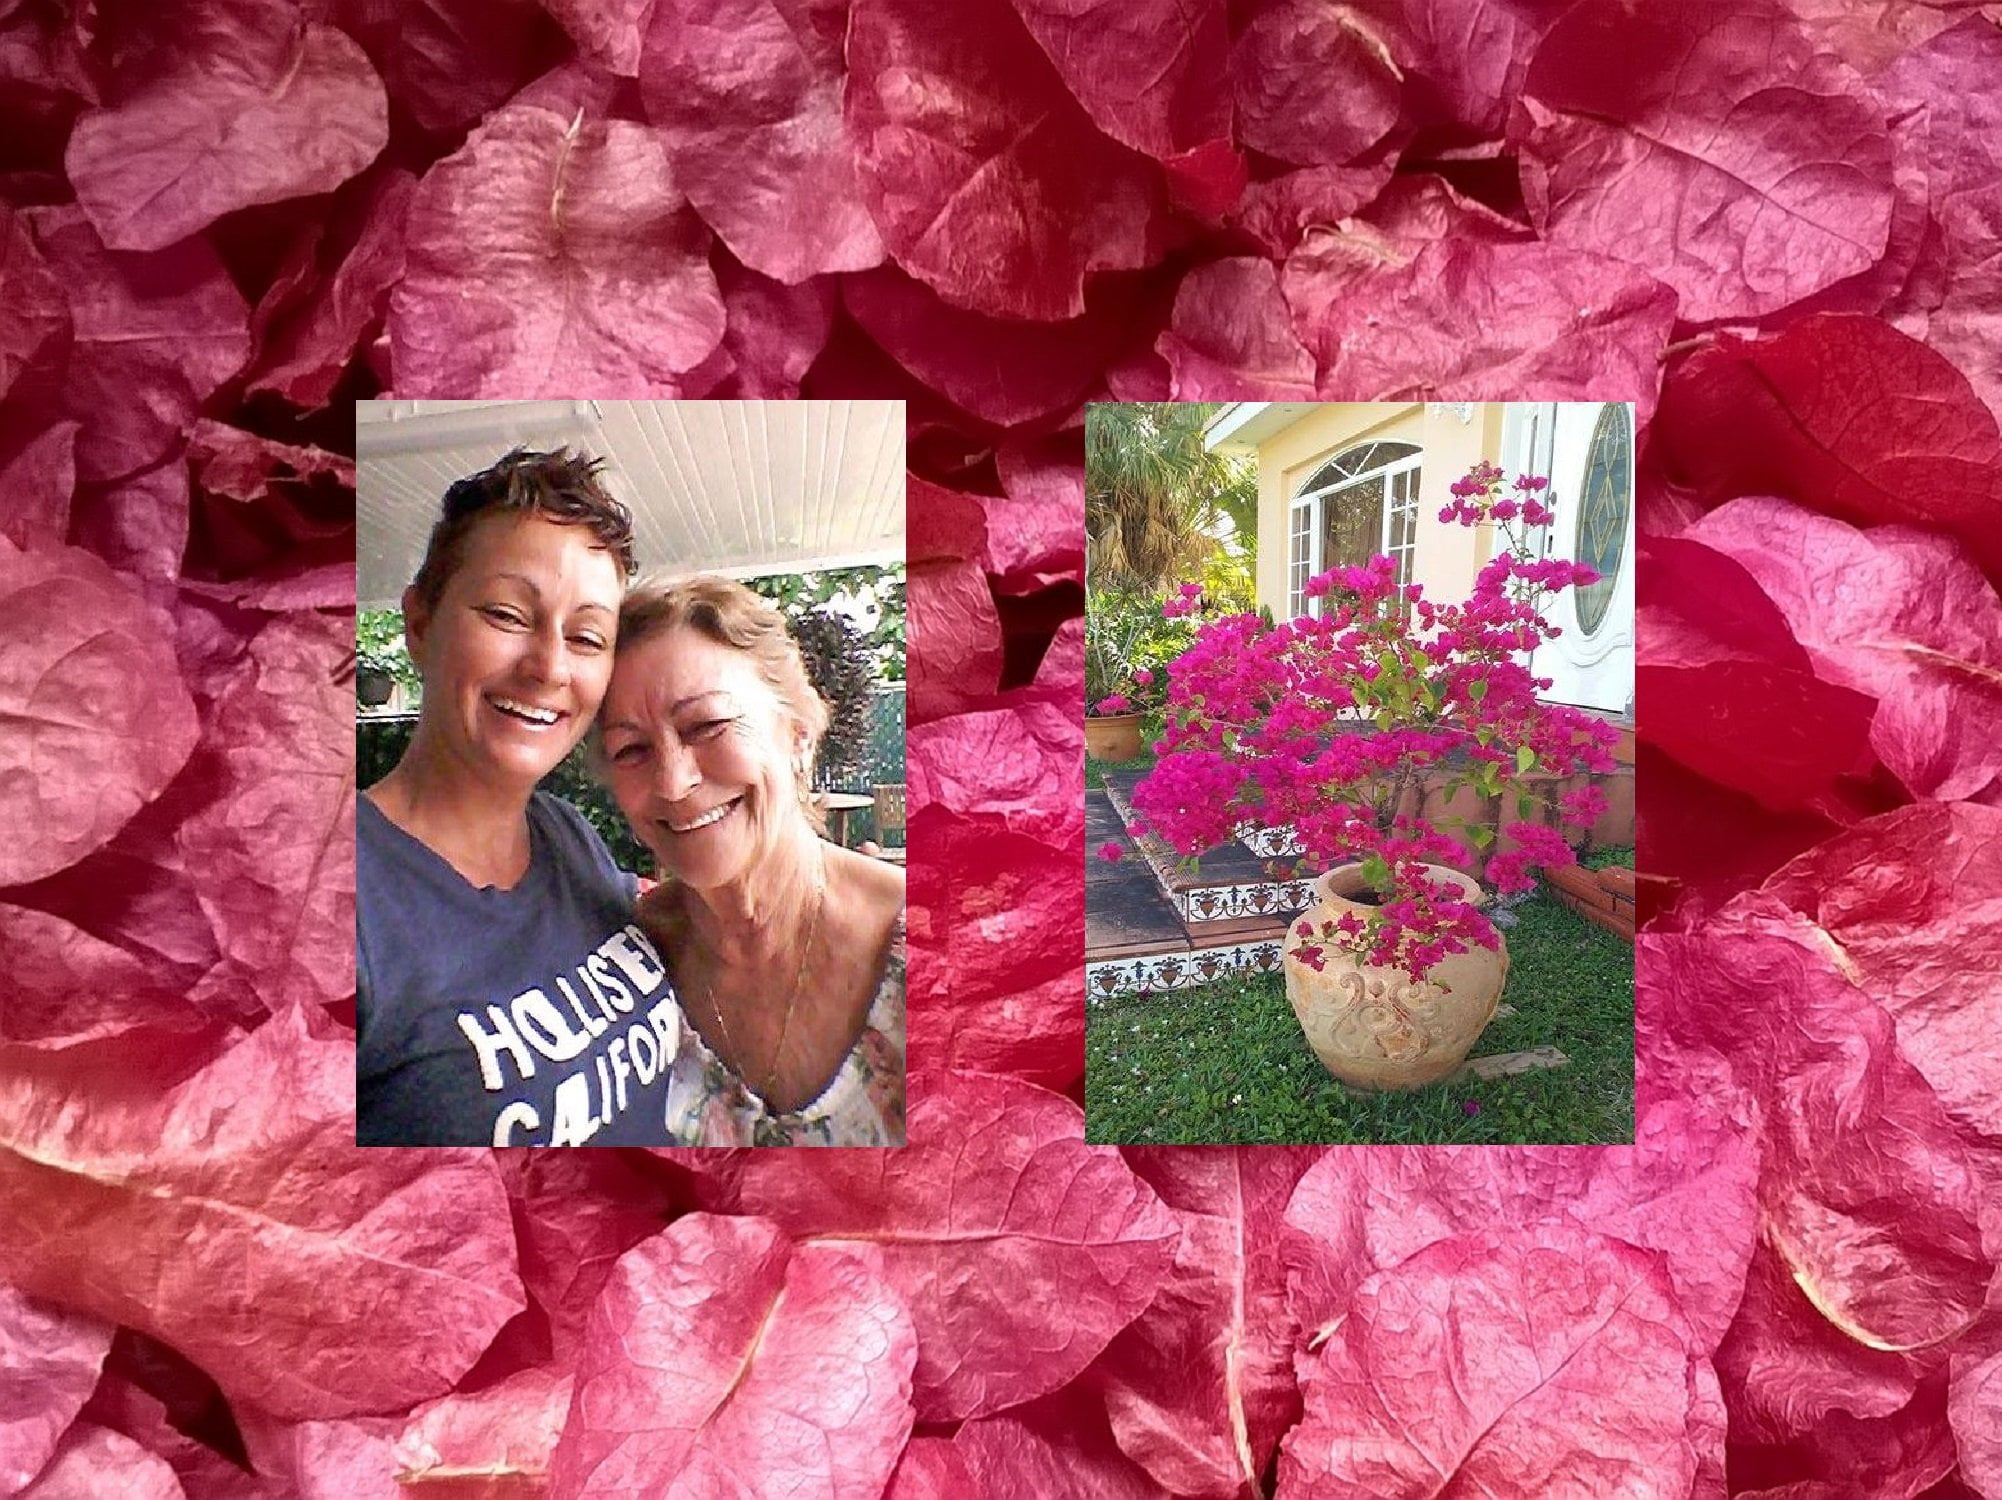 Sumi used a Bios Urn to plant a Bougainvillea tree to honour her mother.